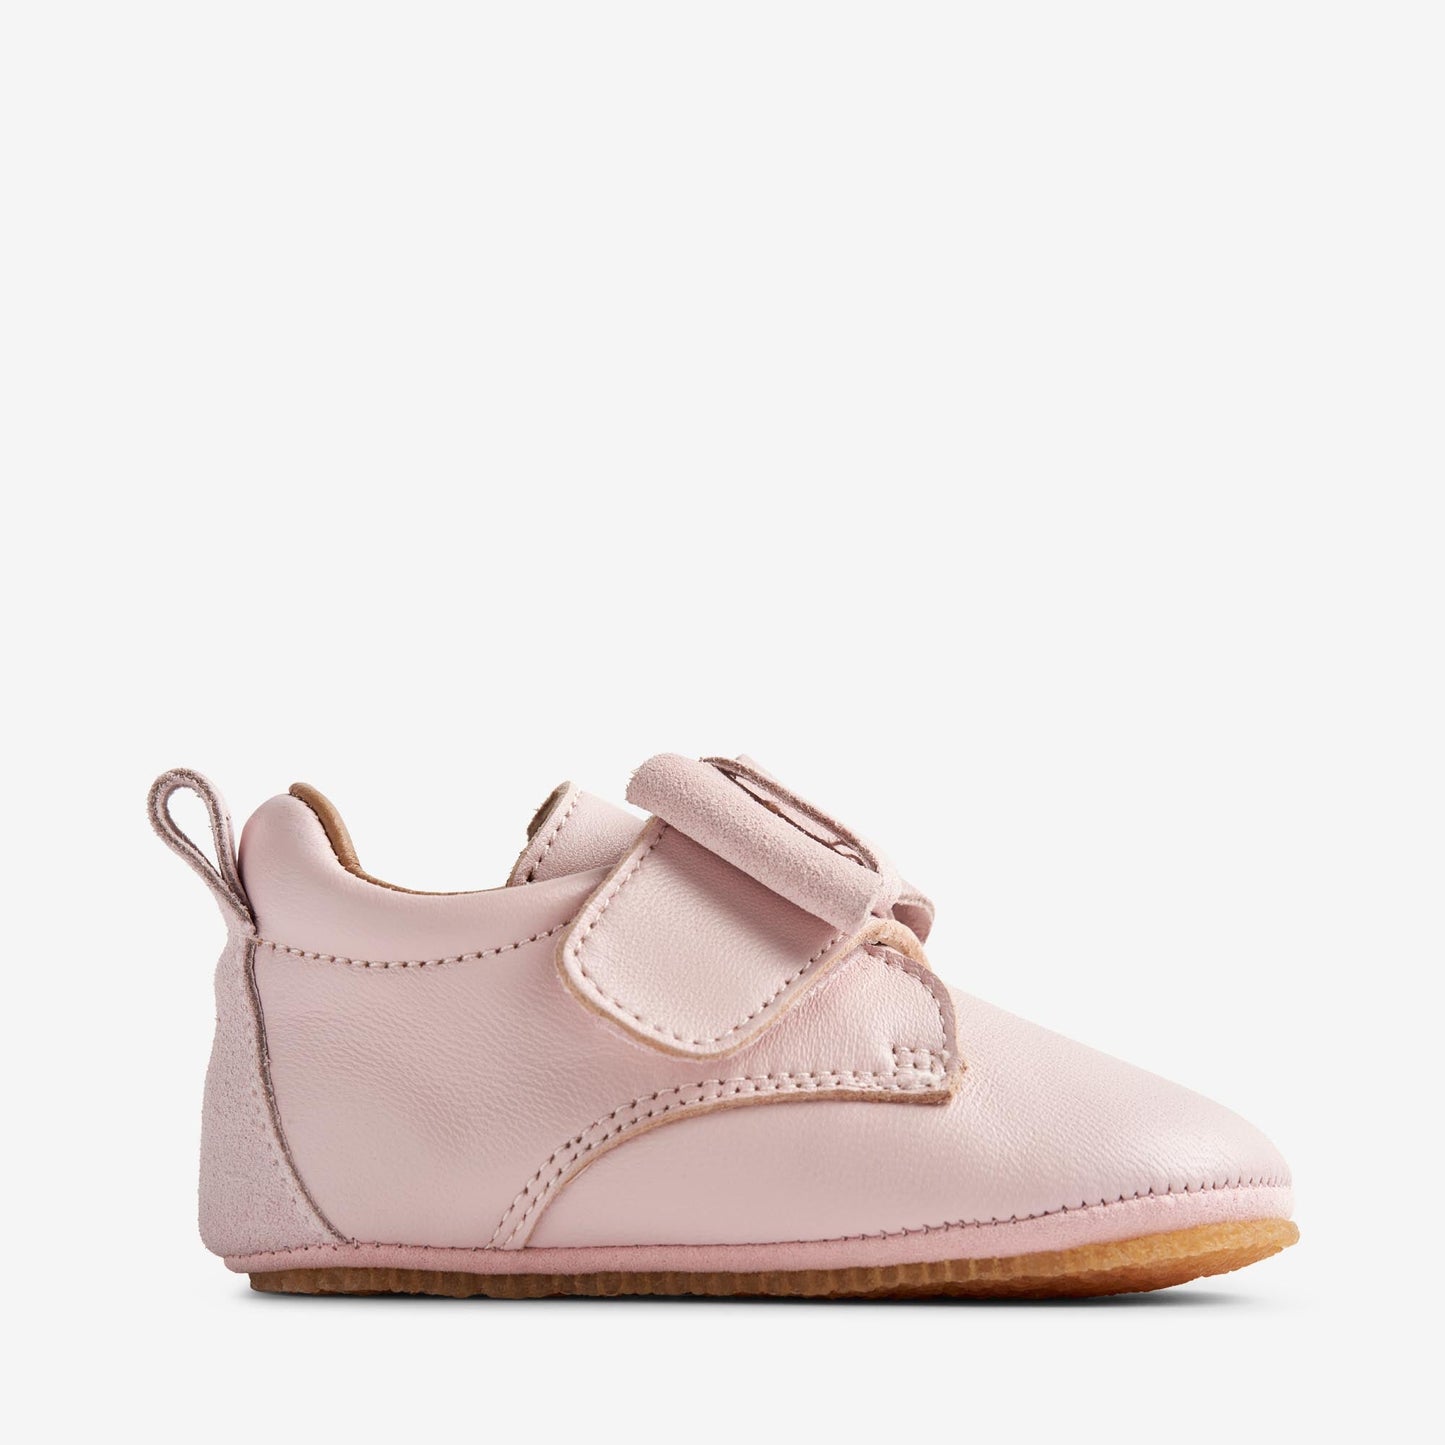 Wheat Baby Indoor Bow Shoe - Rose Ballet